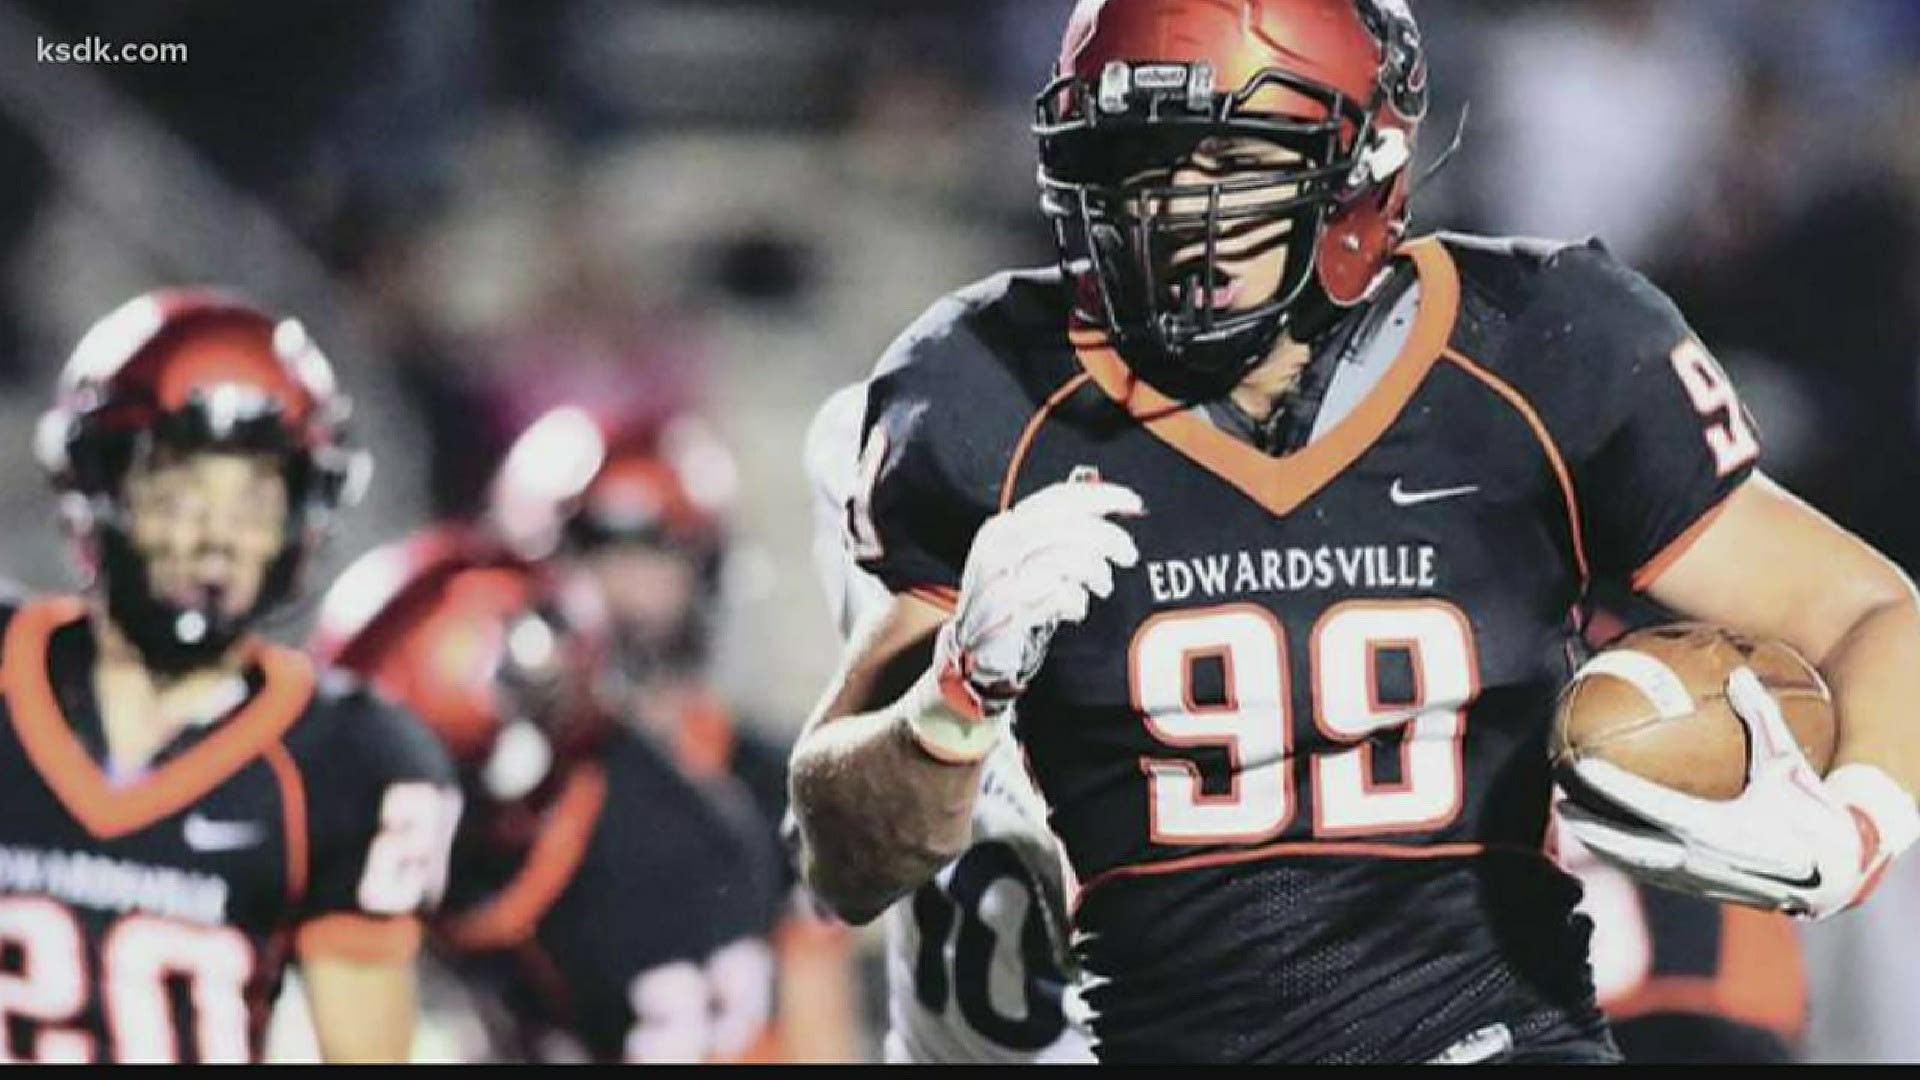 This NFL Draft will be different than any that came before it, but Edwardsville's A.J. Epenesa is ready for anything.